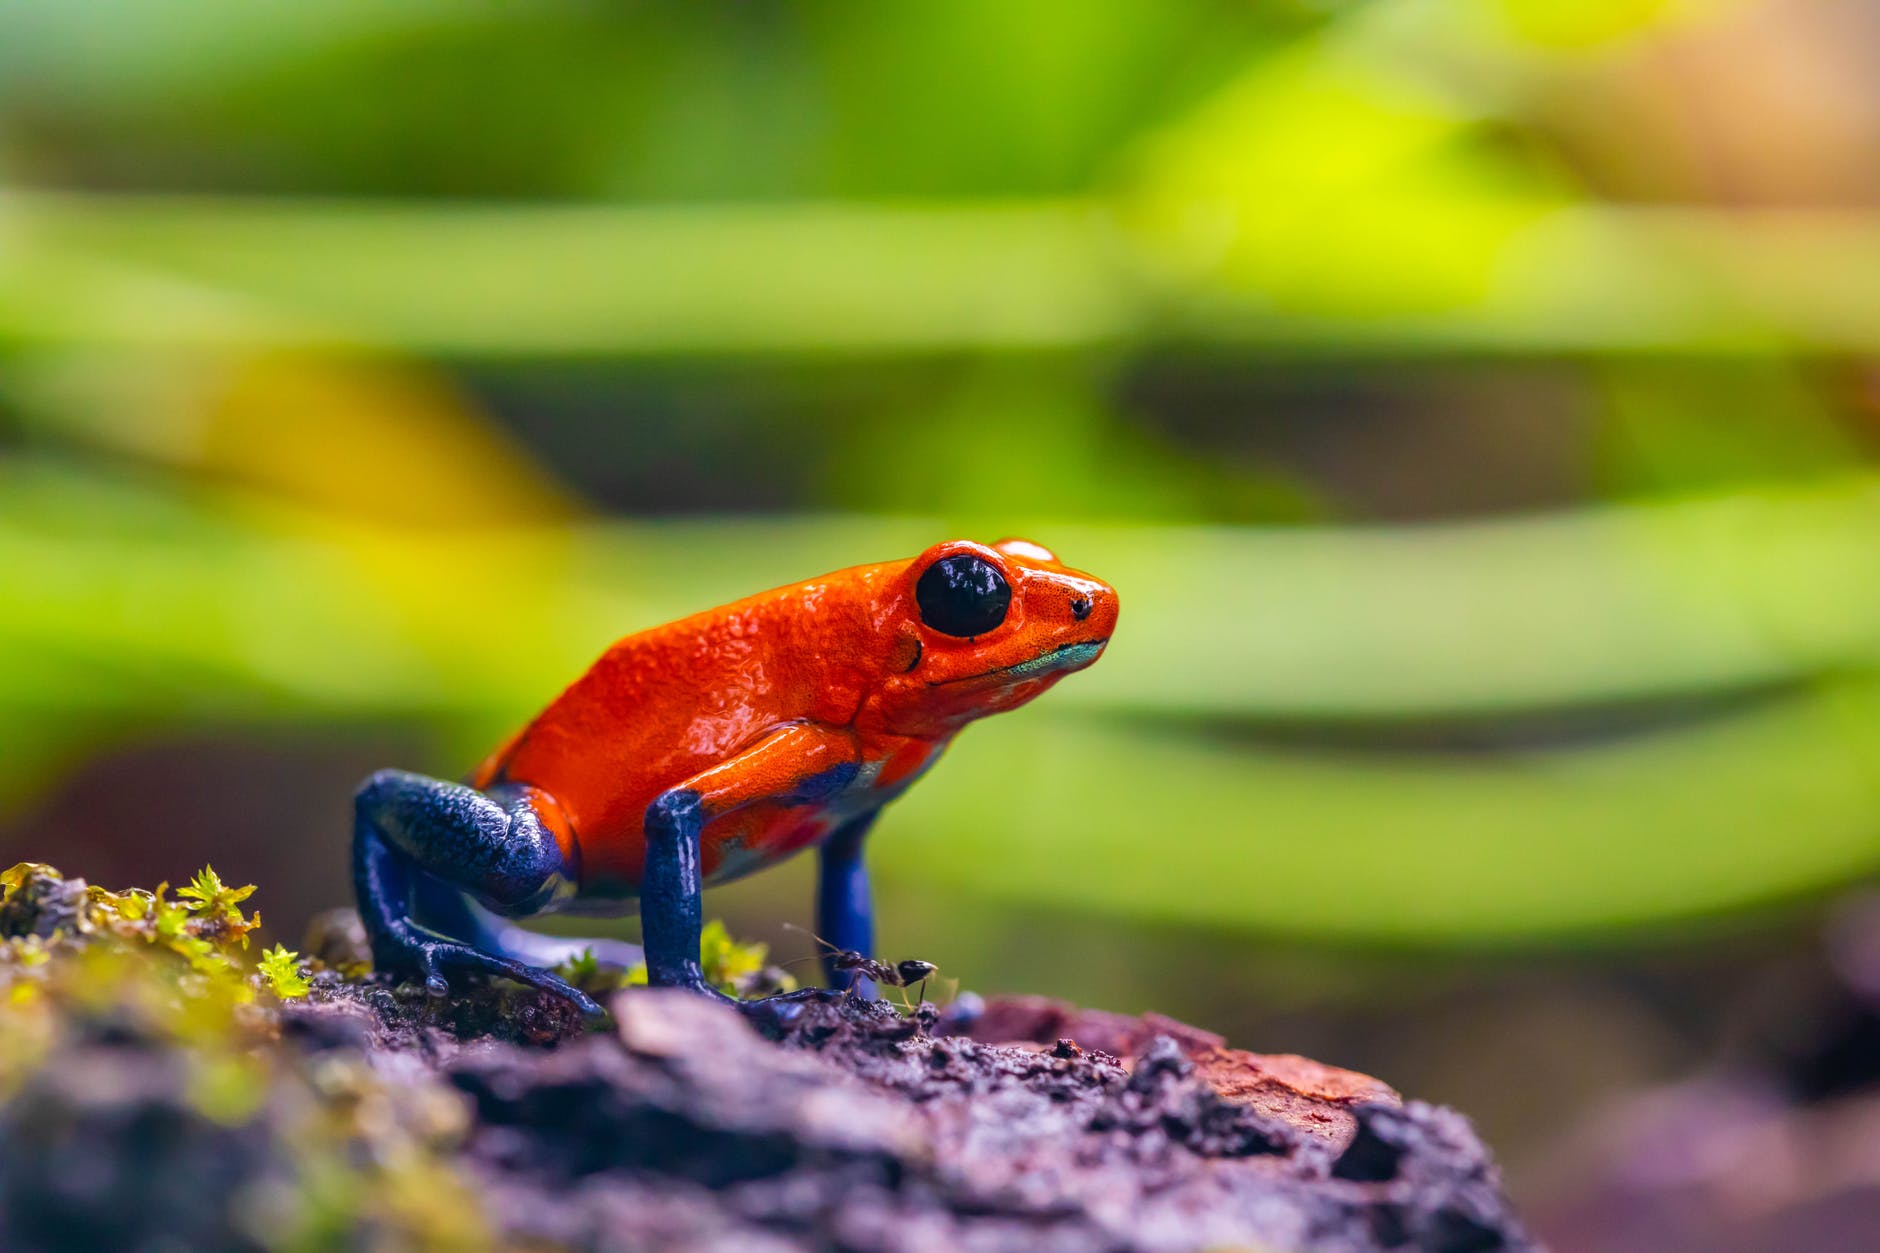 selective focus photo of red and blue frog on ground